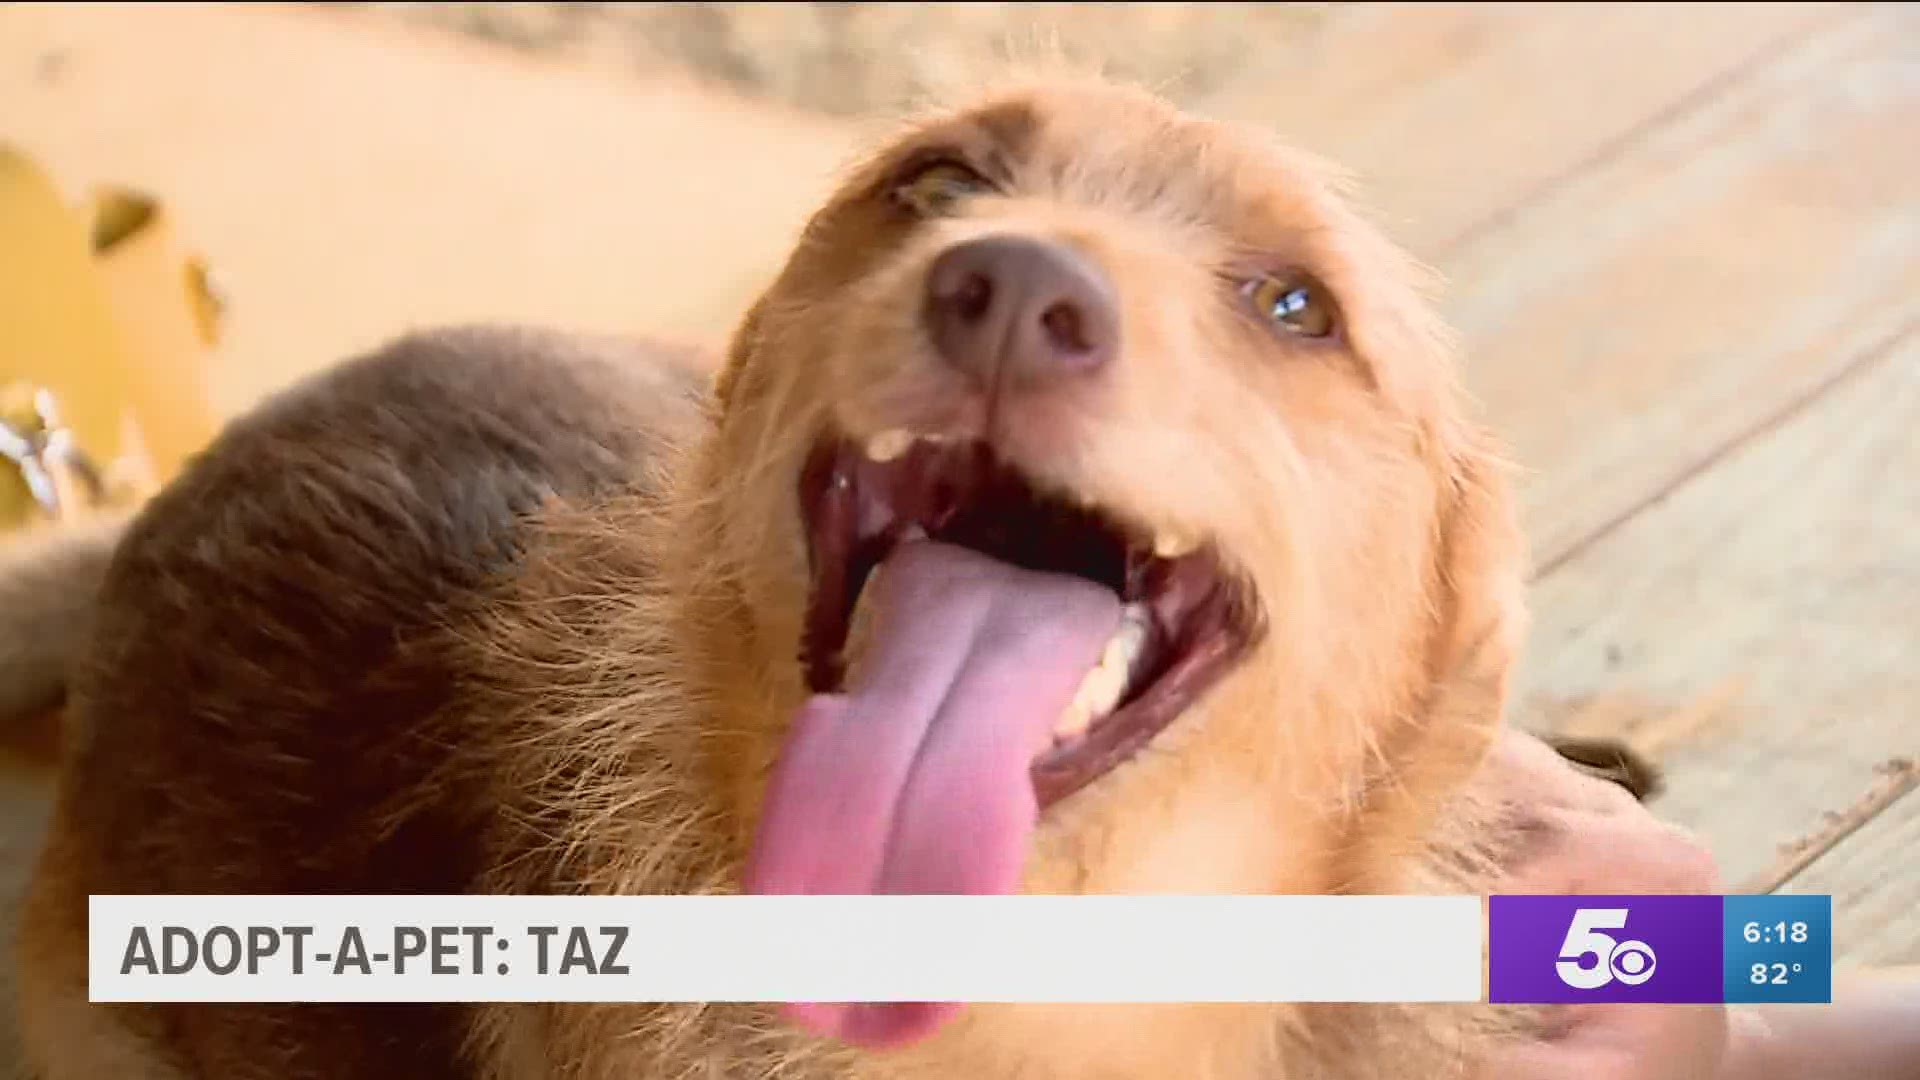 Taz is a one and a half year old long-haired terrier mix who's ready for his forever home. https://bit.ly/3ahwAHu